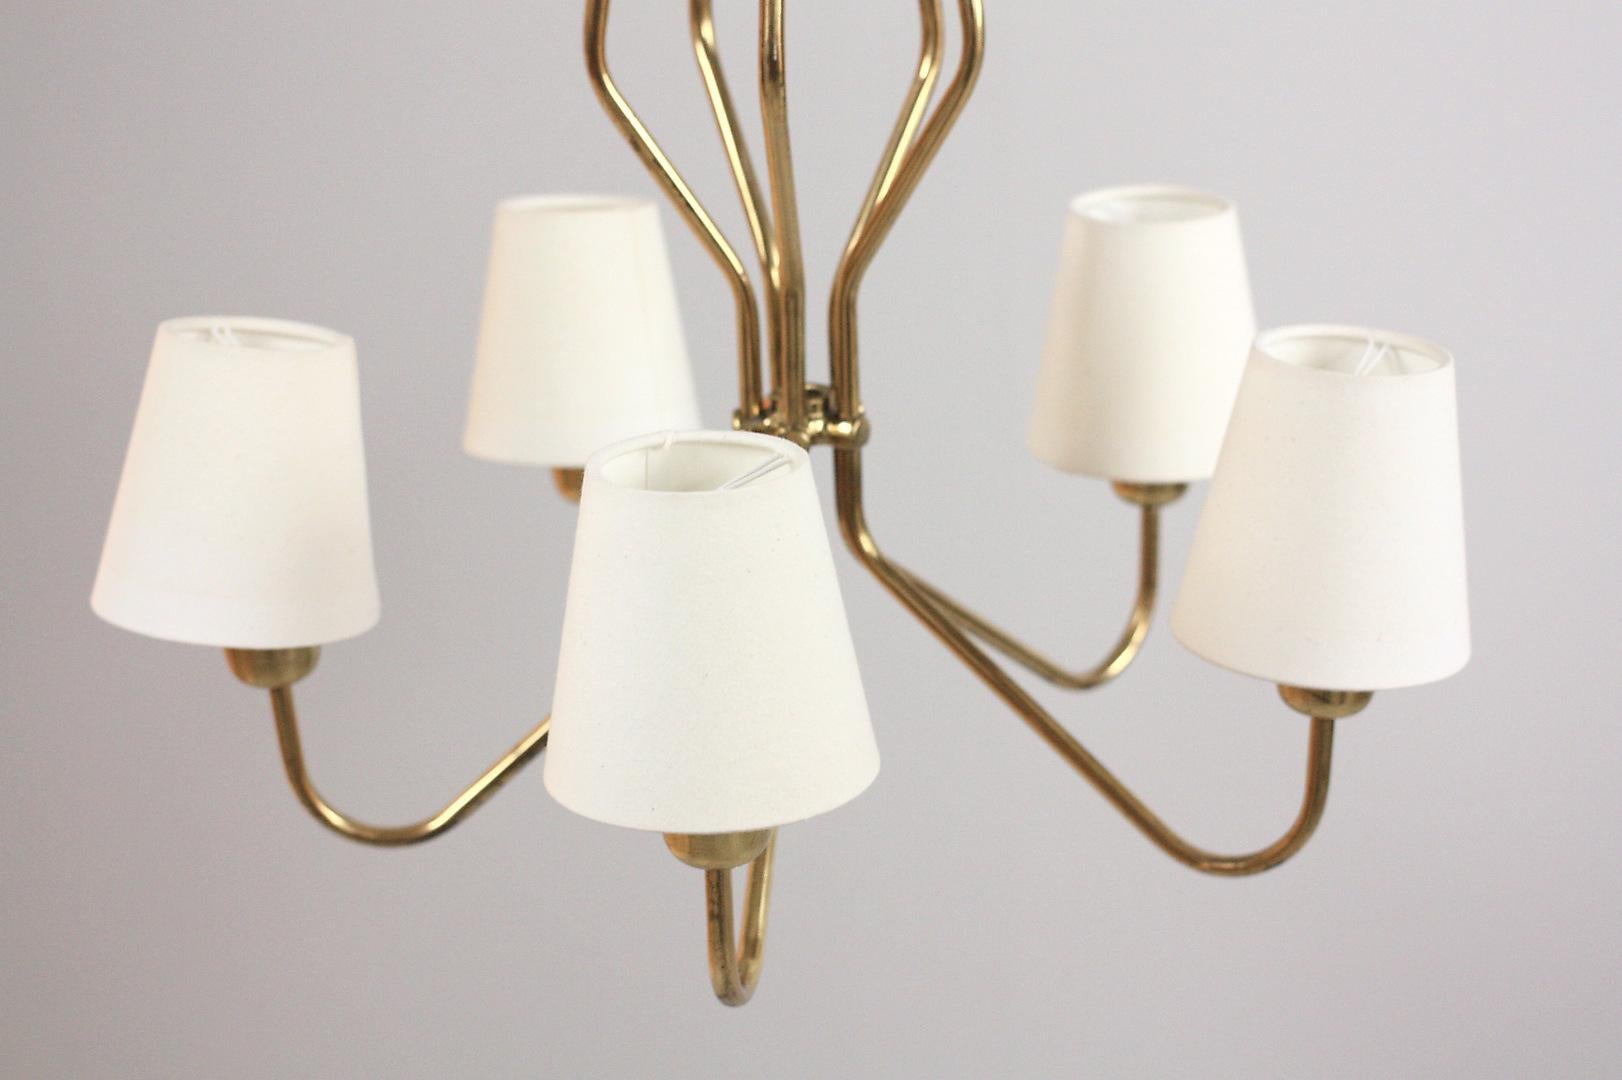 Midcentury brass chandelier with five bulbs. This beautiful midcentury light can have the cords (additional cost) be changed to any color wire or cloth wire. Original shades.